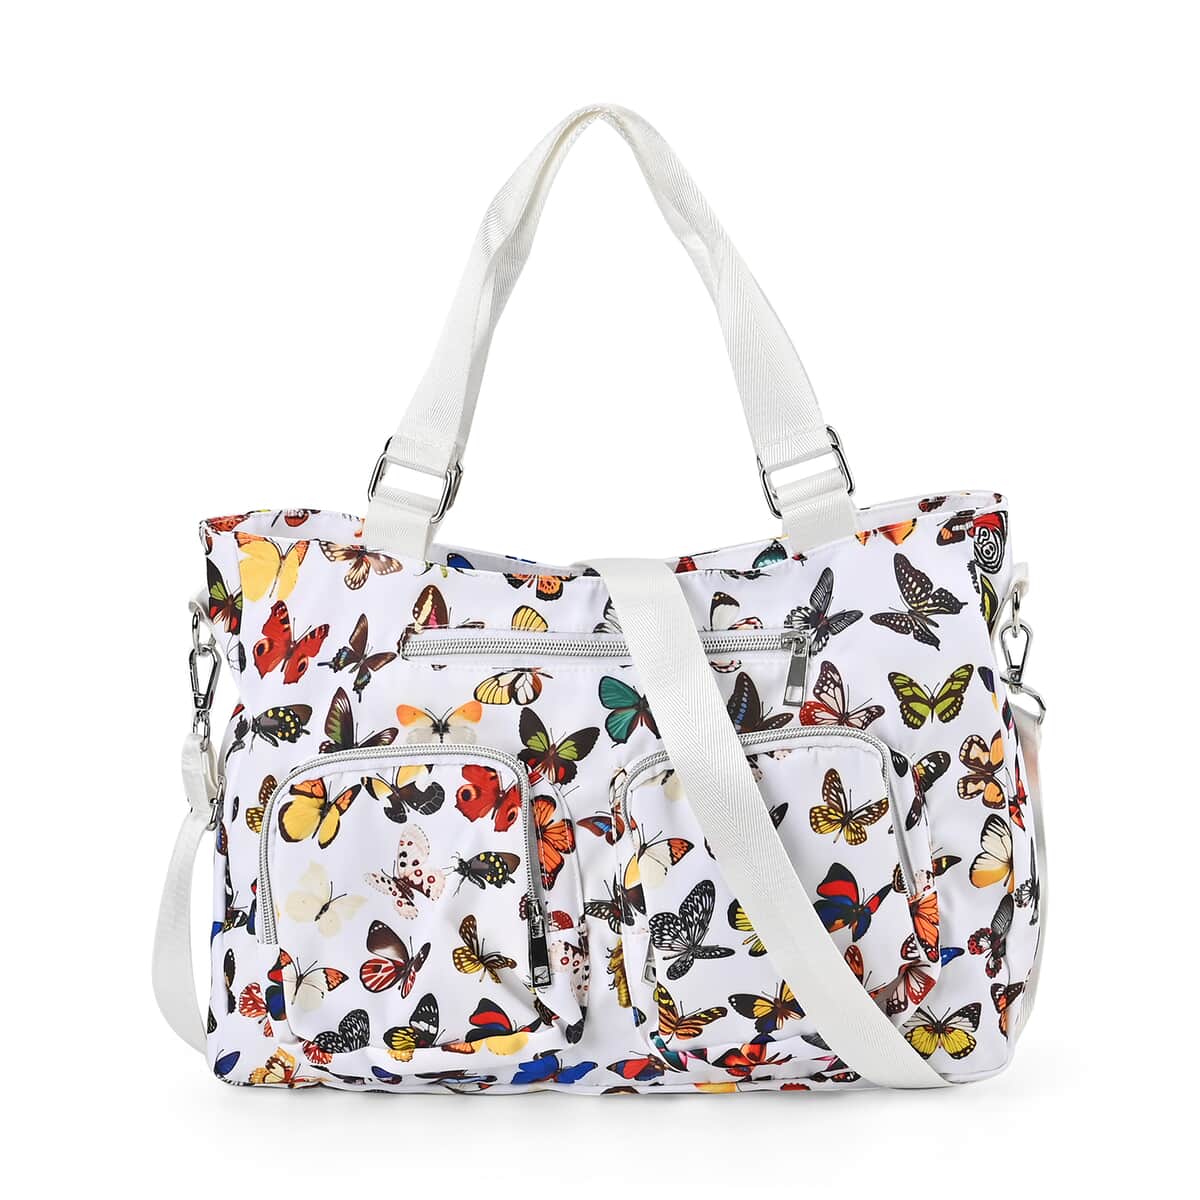 White and Multi Butterfly Pattern CrossBody Bag (14.6"x3.9"x10.6") with Handle Drop and Shoulder Strap (50.8") image number 0